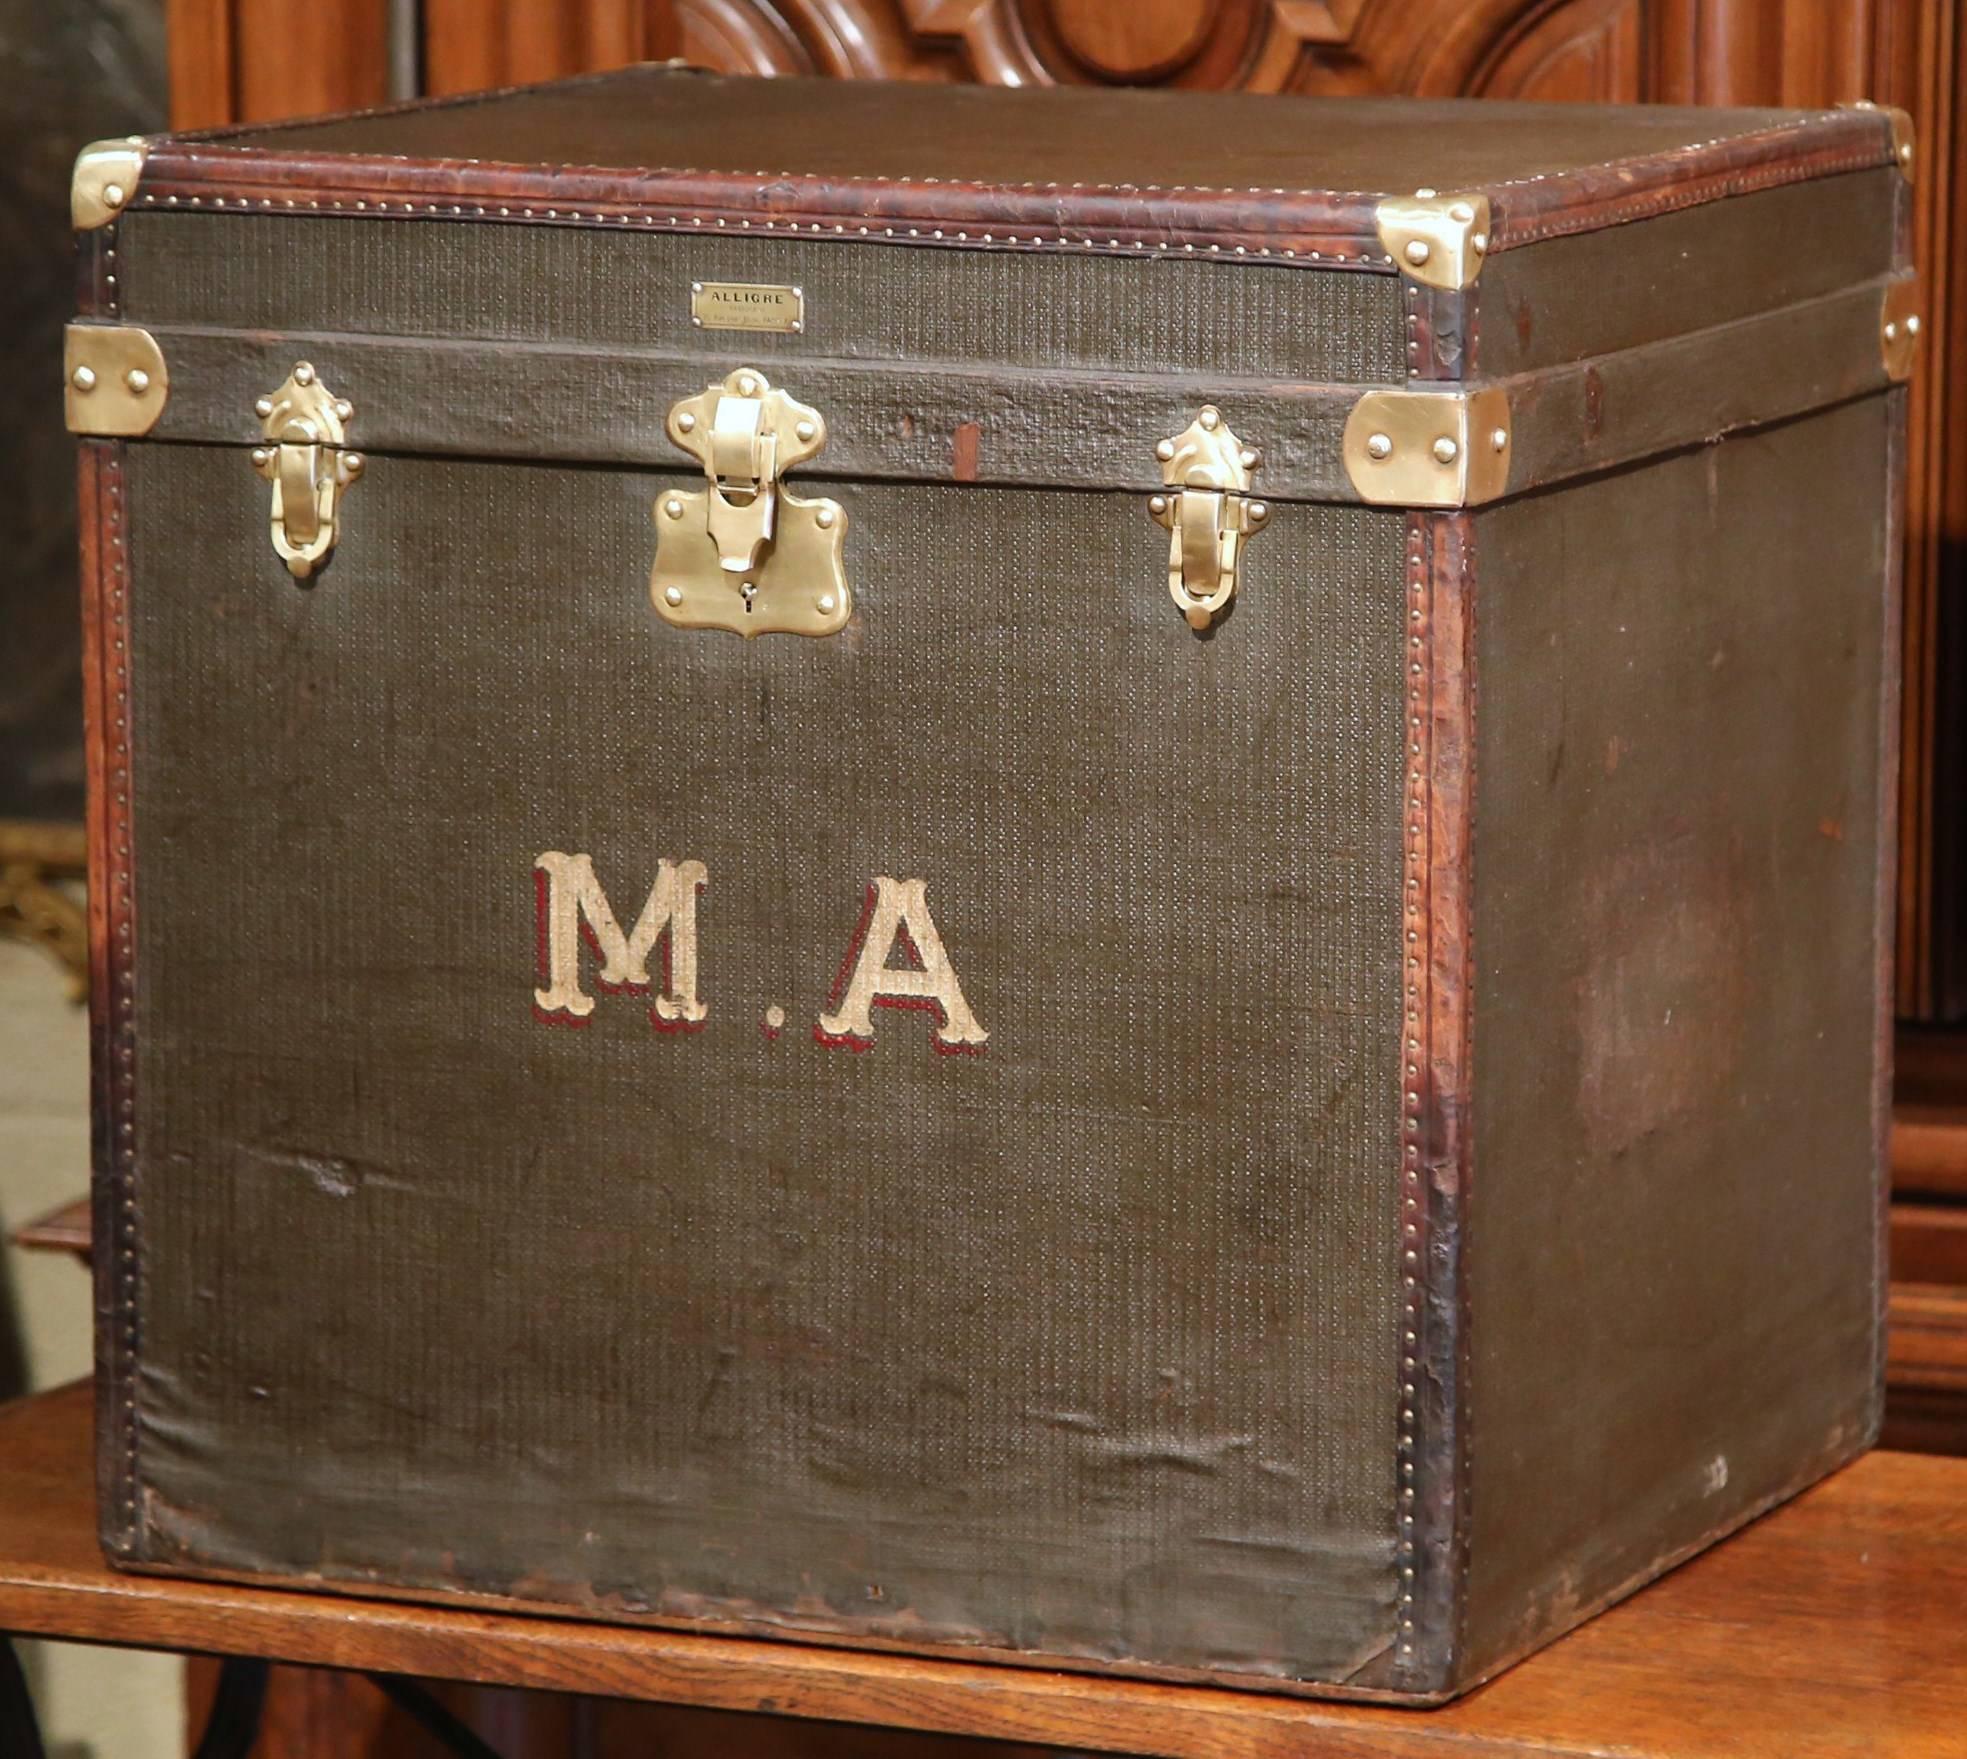 Hand-Crafted 19th Century French Leather and Brass Trunk Luggage Signed Alligre Paris